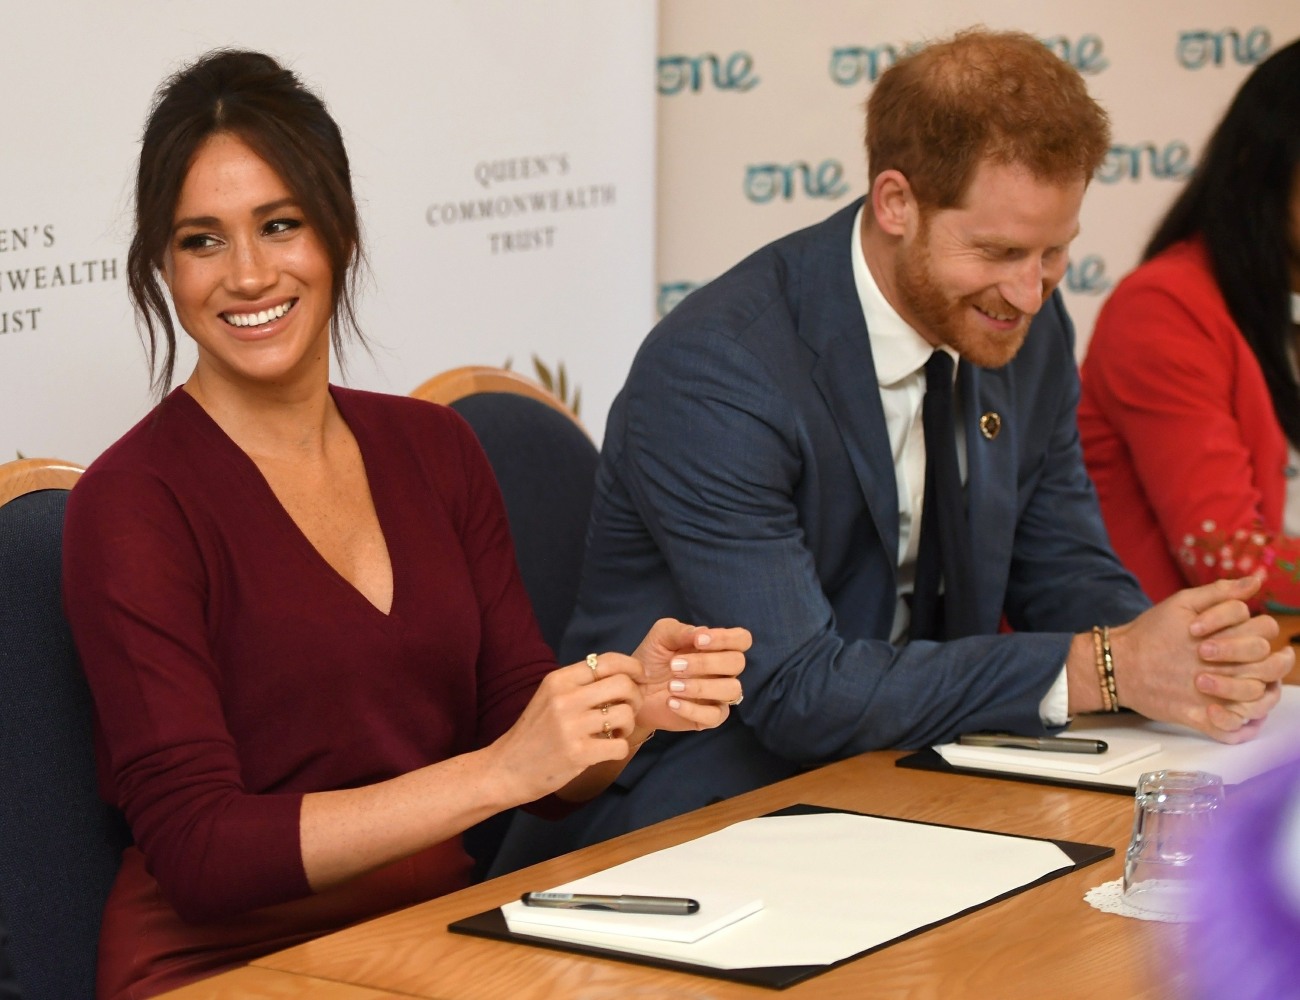 Meghan Markle, Duchess of Sussex, and Prince Harry, Duke of Sussex, attend a roundtable discussion on gender equality!